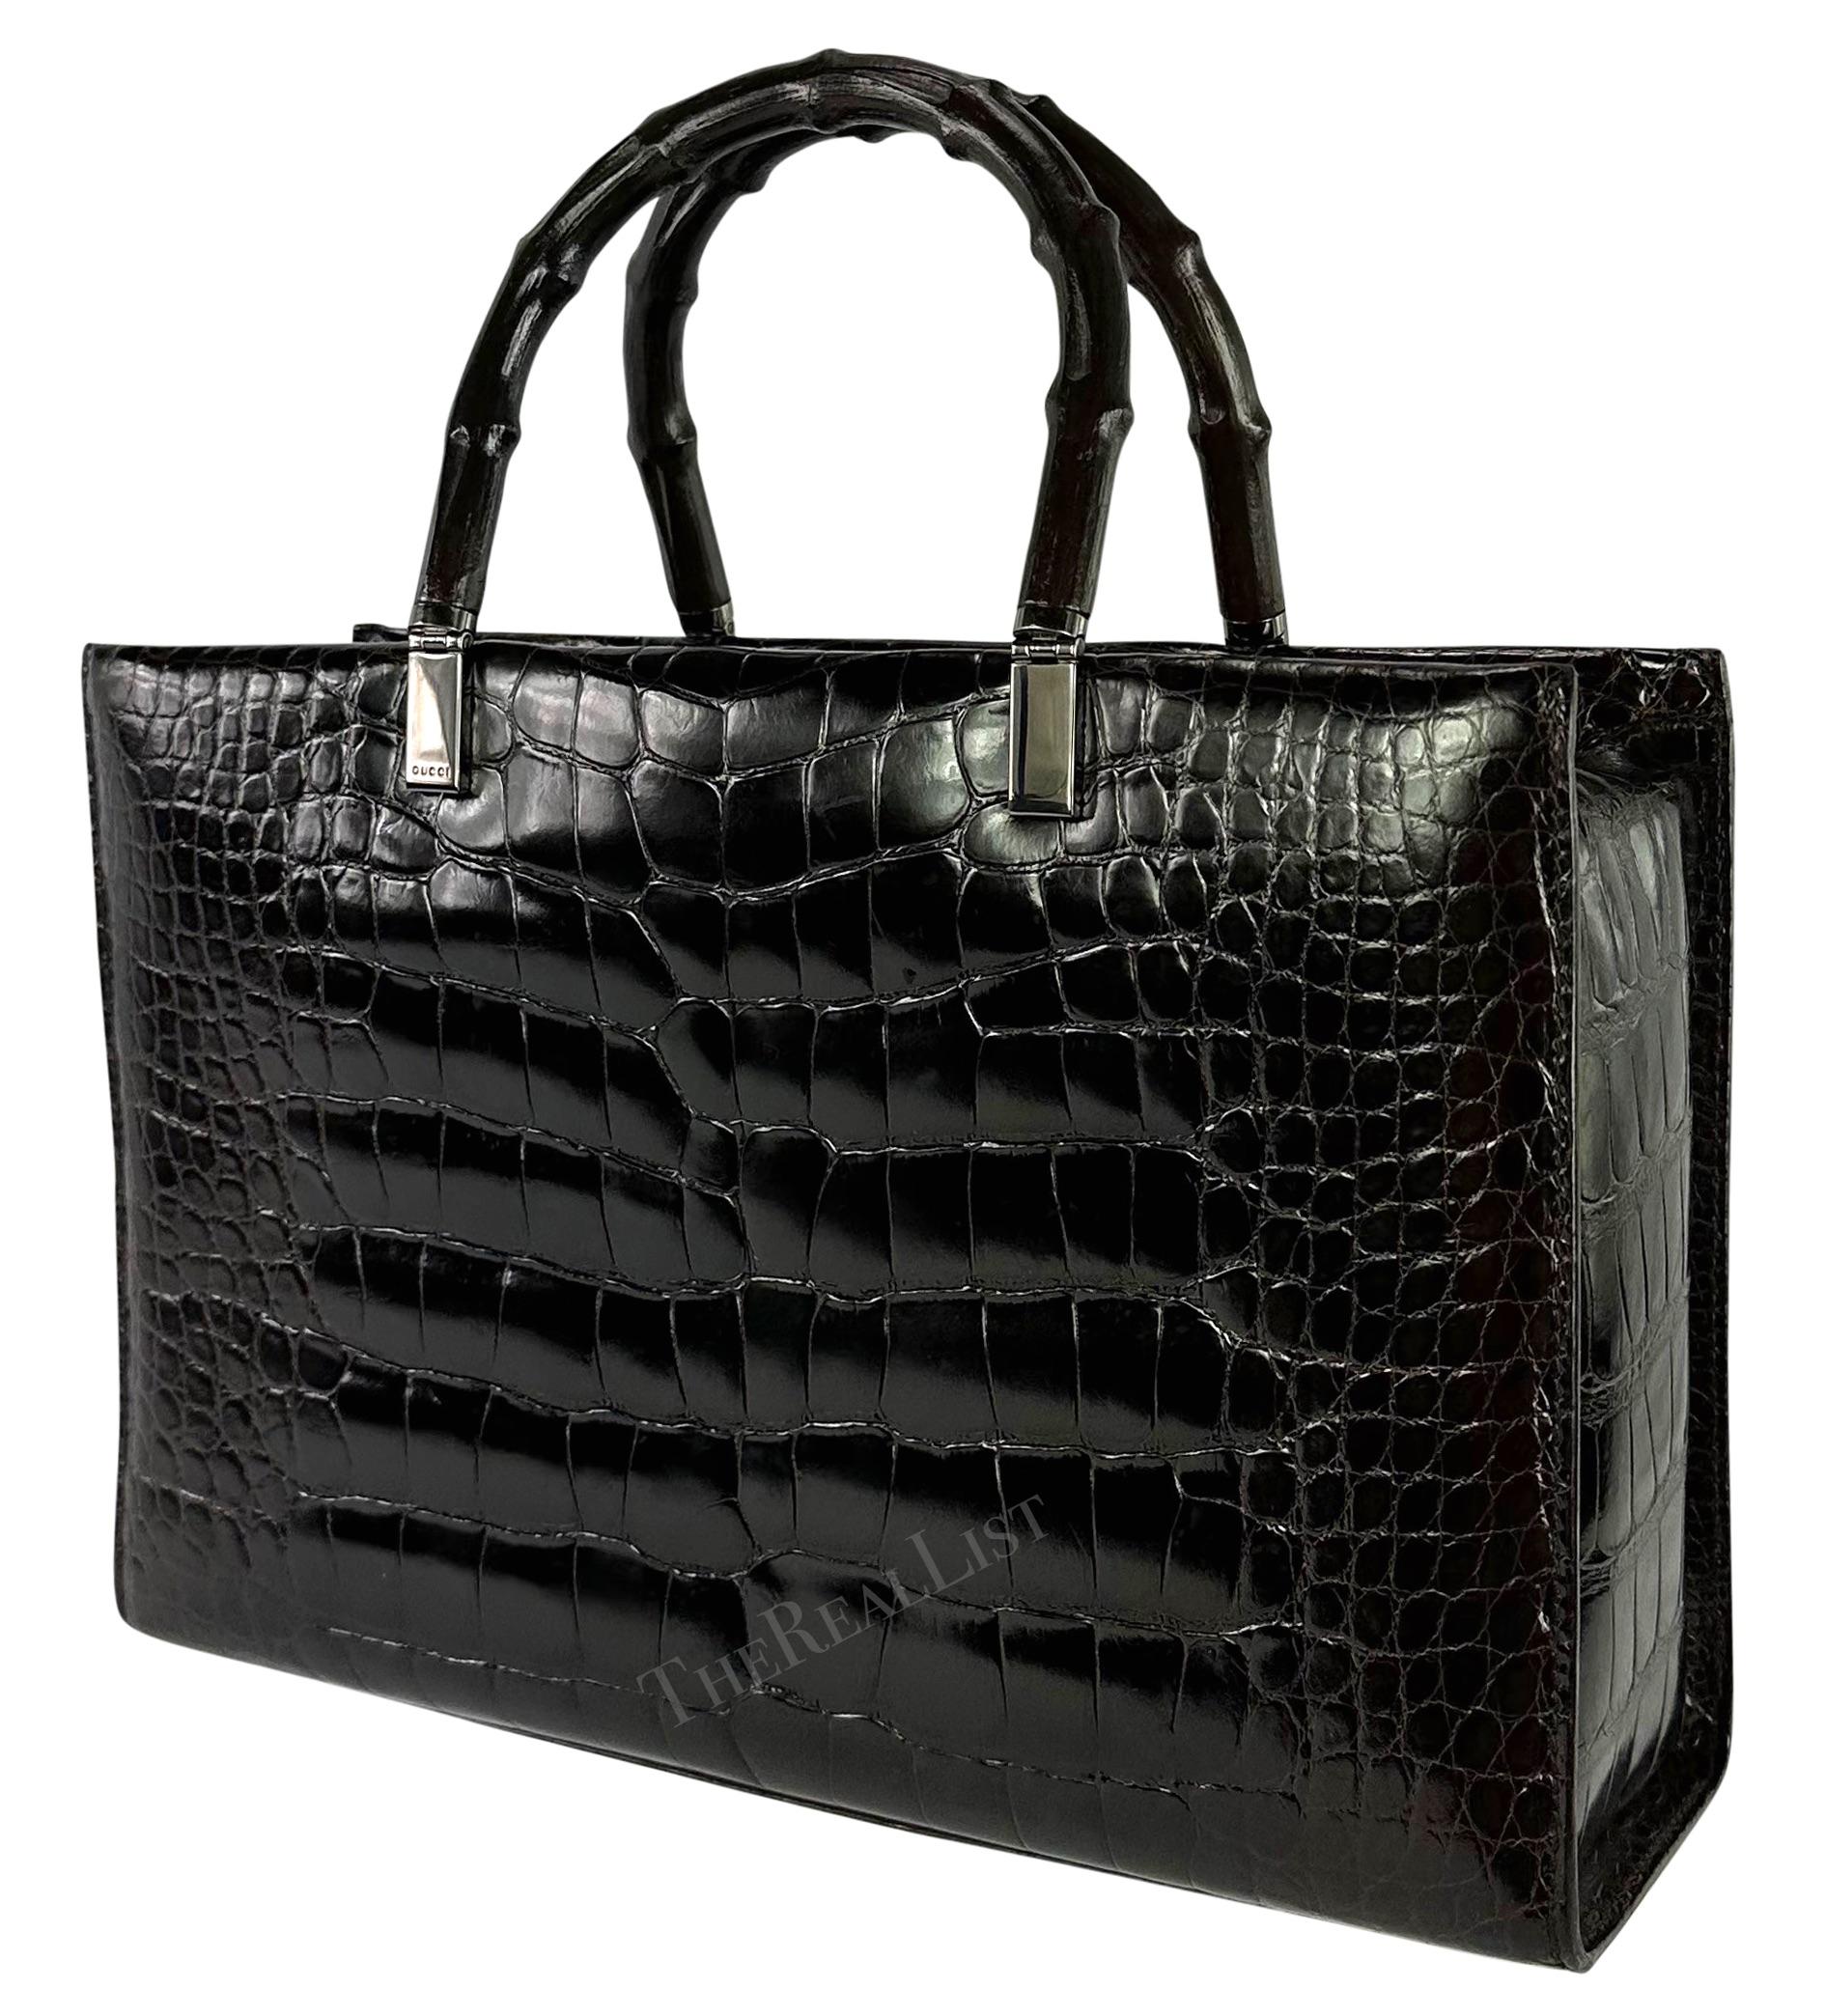 F/W 1998 Gucci by Tom Ford Ad Campaigner Black Crocodile Bamboo Tote Bag  Excellent état - En vente à West Hollywood, CA